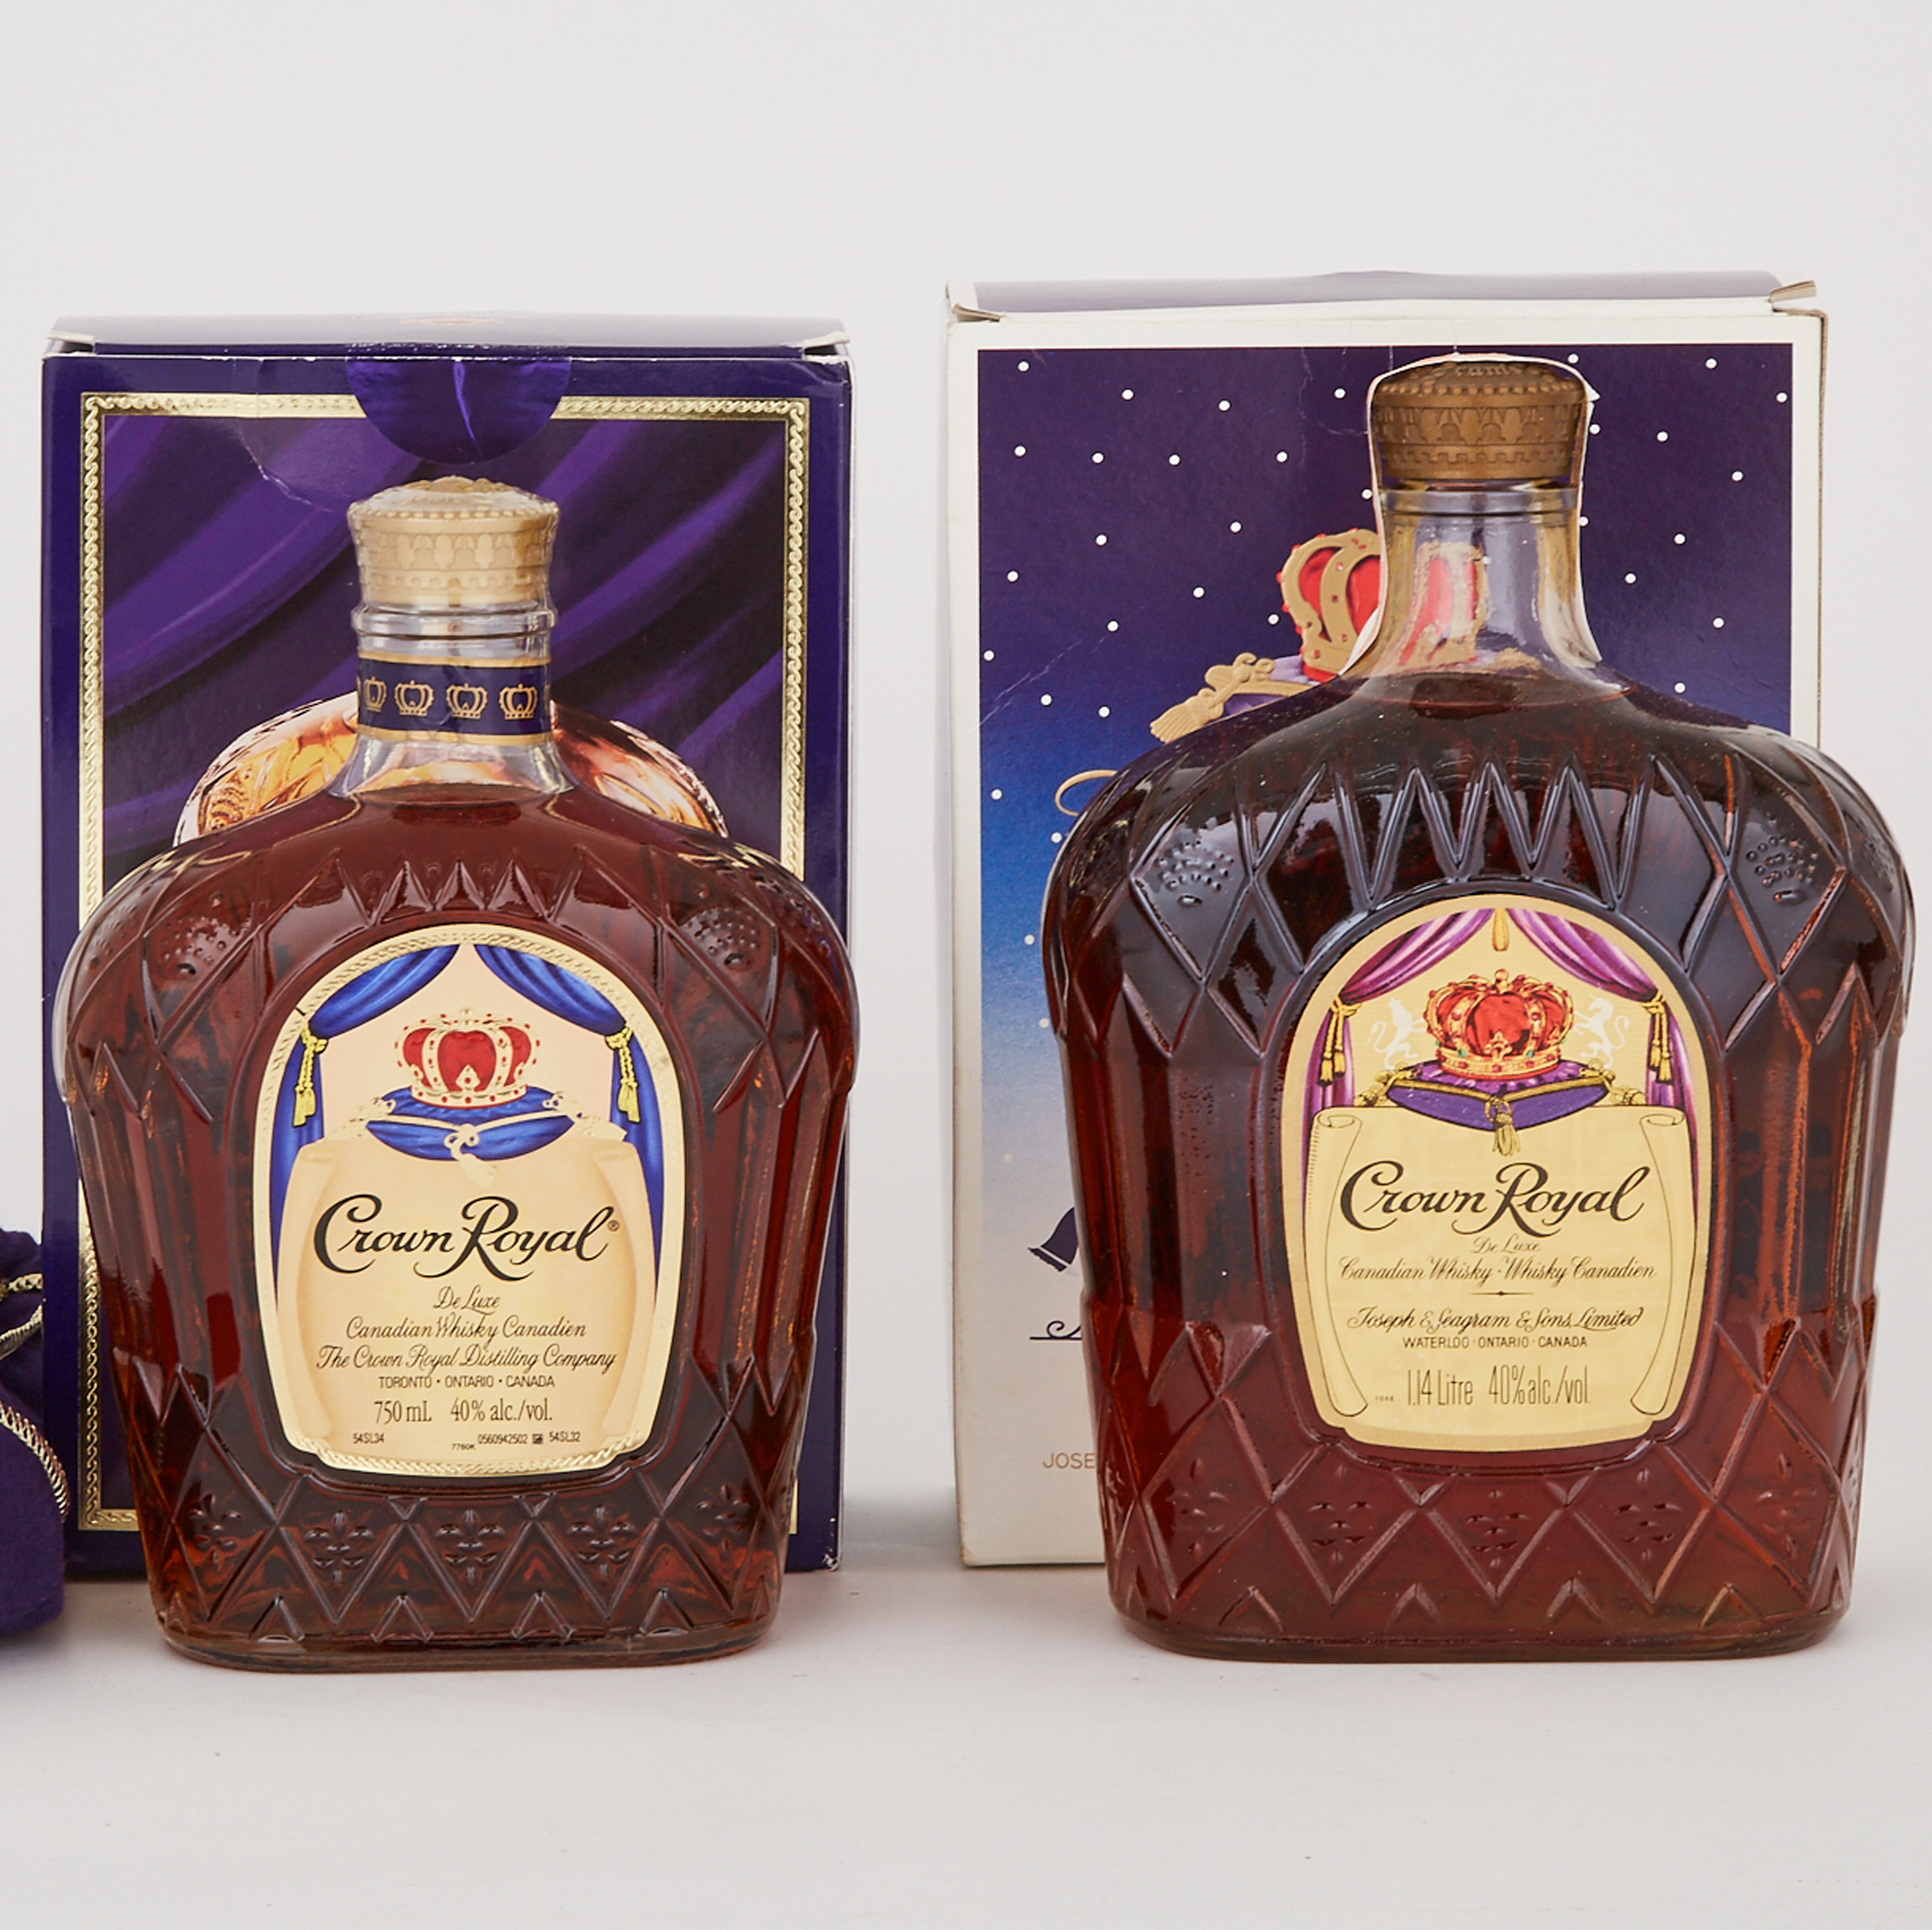 CROWN ROYAL DELUXE CANADIAN WHISKEY (ONE 1140 ML)
CROWN ROYAL DELUXE CANADIAN WHISKEY (ONE 1140 ML)